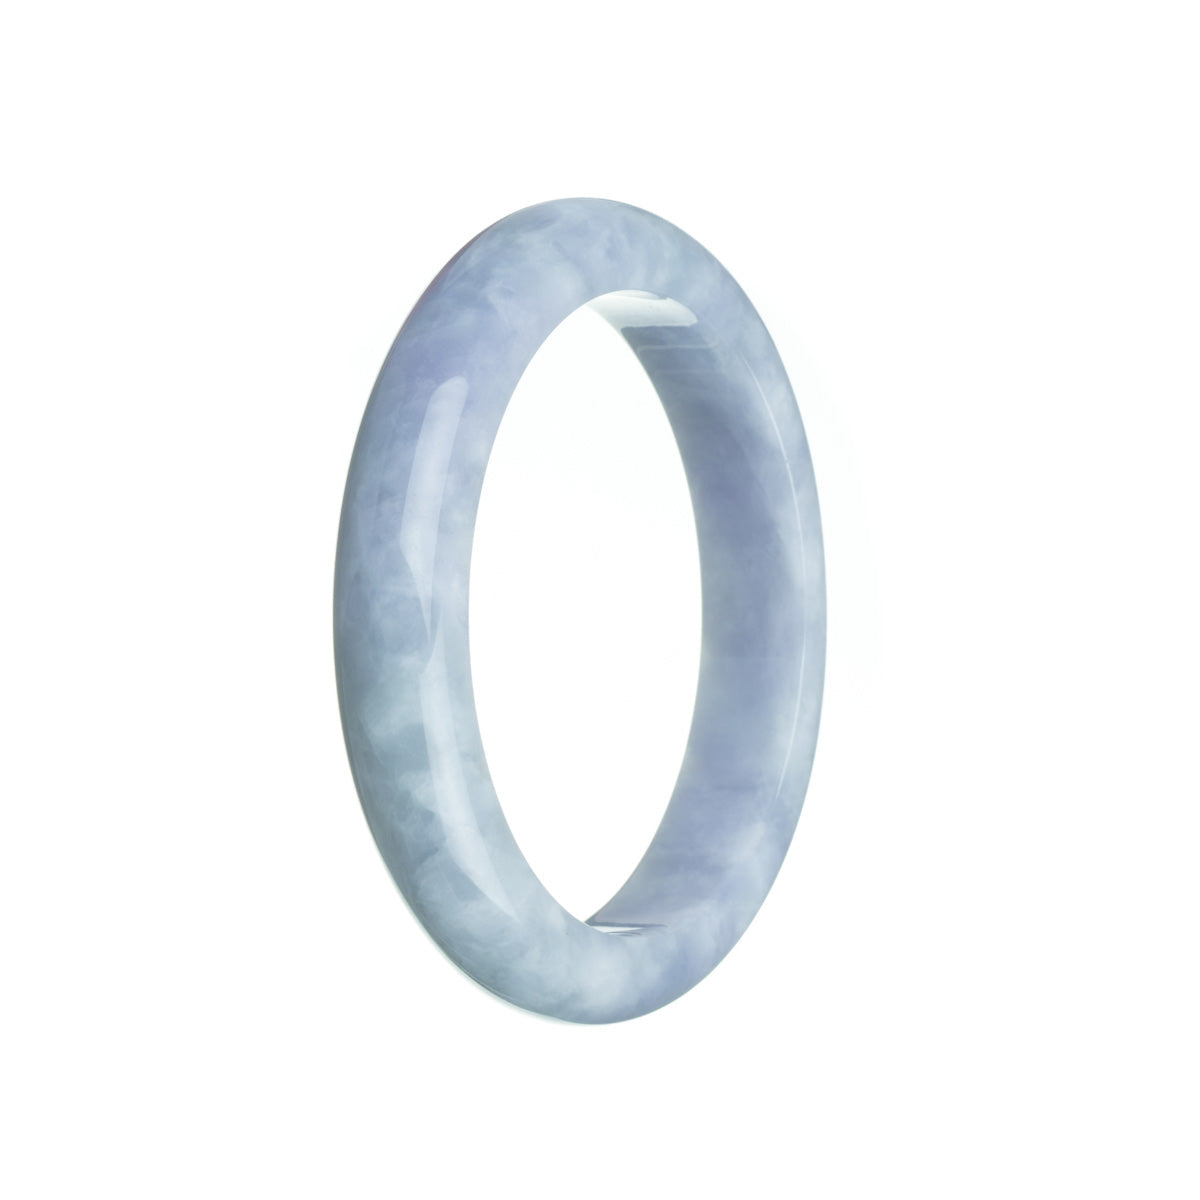 A beautiful lavender jadeite jade bangle bracelet, featuring a semi-round shape and measuring 56mm in size. Crafted with real grade A jade, this bracelet is a stunning piece of jewelry from MAYS GEMS.